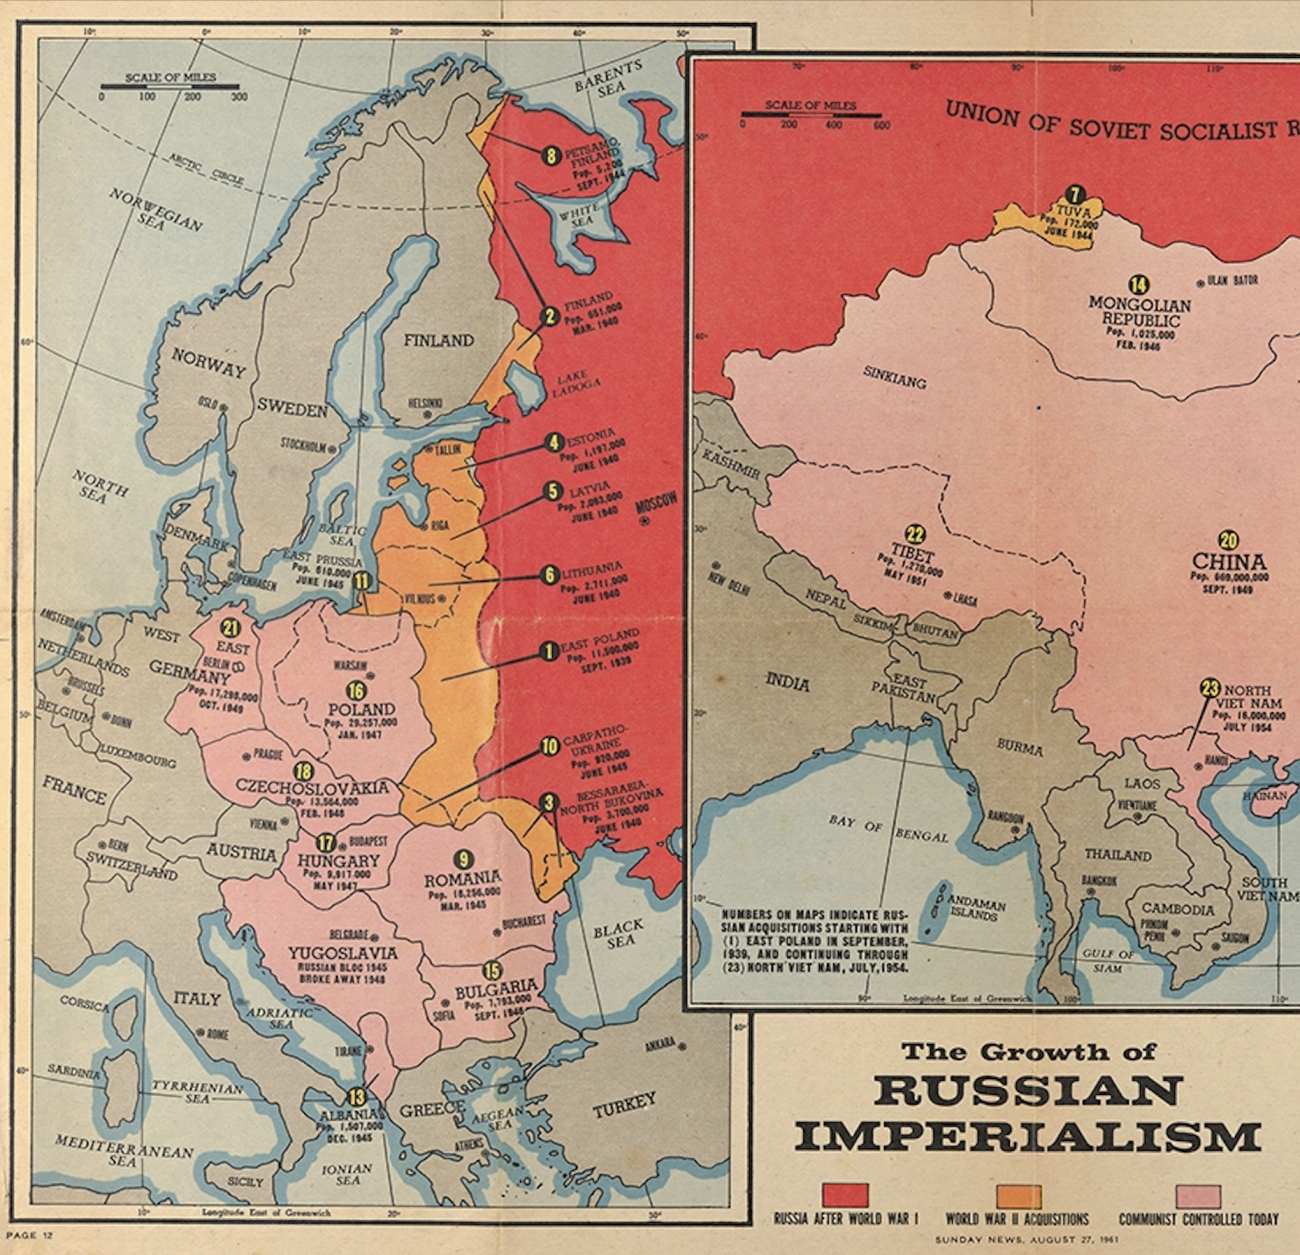 Routley, Nick. “4 Historical Maps That Explain the USSR.” Visual Capitalist, 18 June 2022, https://www.visualcapitalist.com/4-historical-maps-that-explain-the-ussr/. 